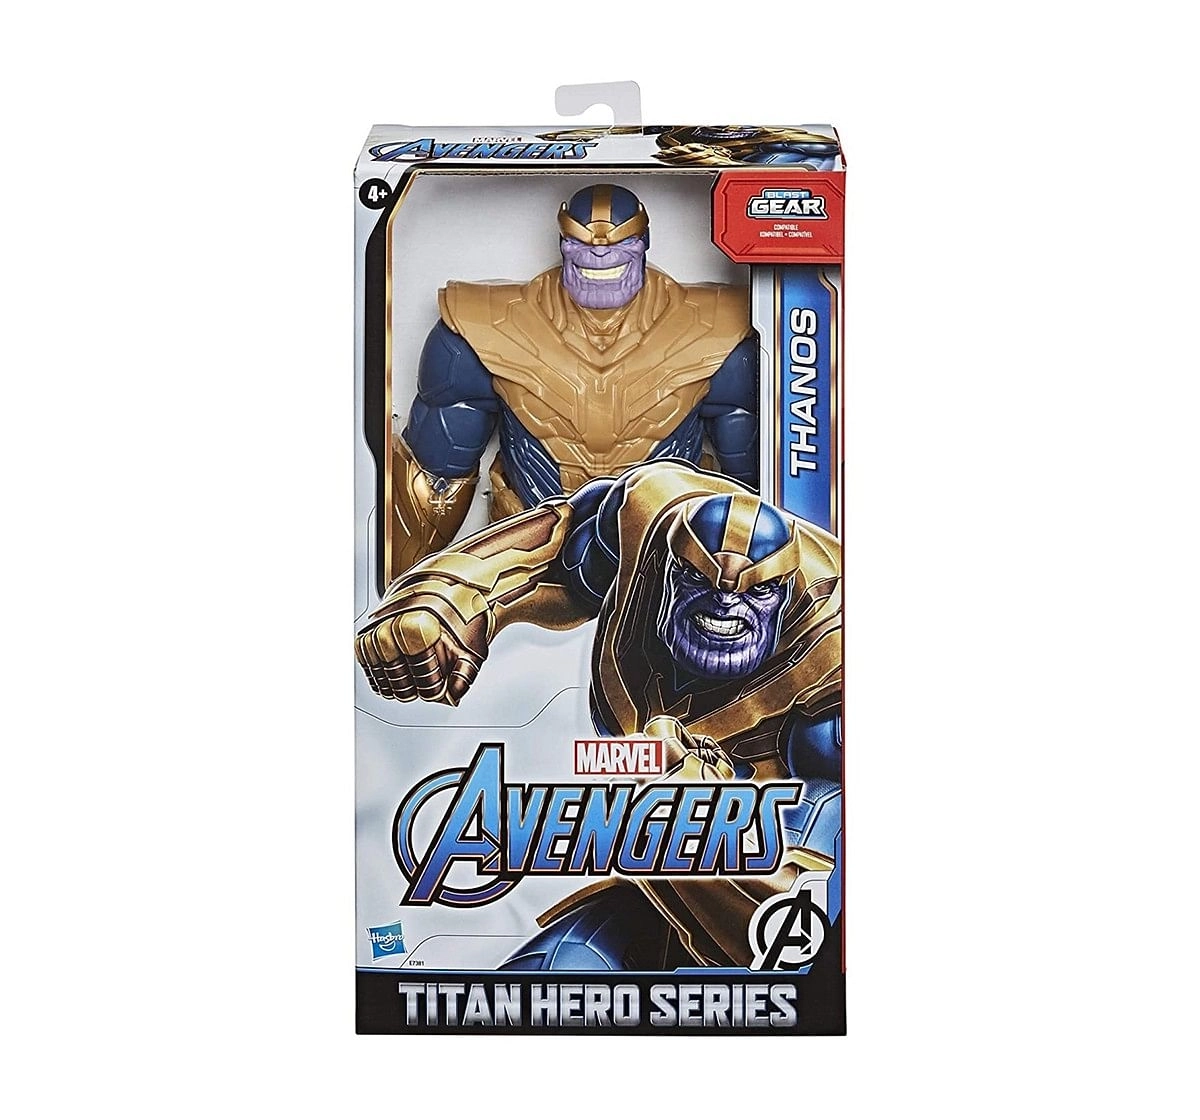 Marvel Avengers Titan Hero Series Blast Gear Deluxe Thanos Action Figure Action Figures for Kids age 4Y+